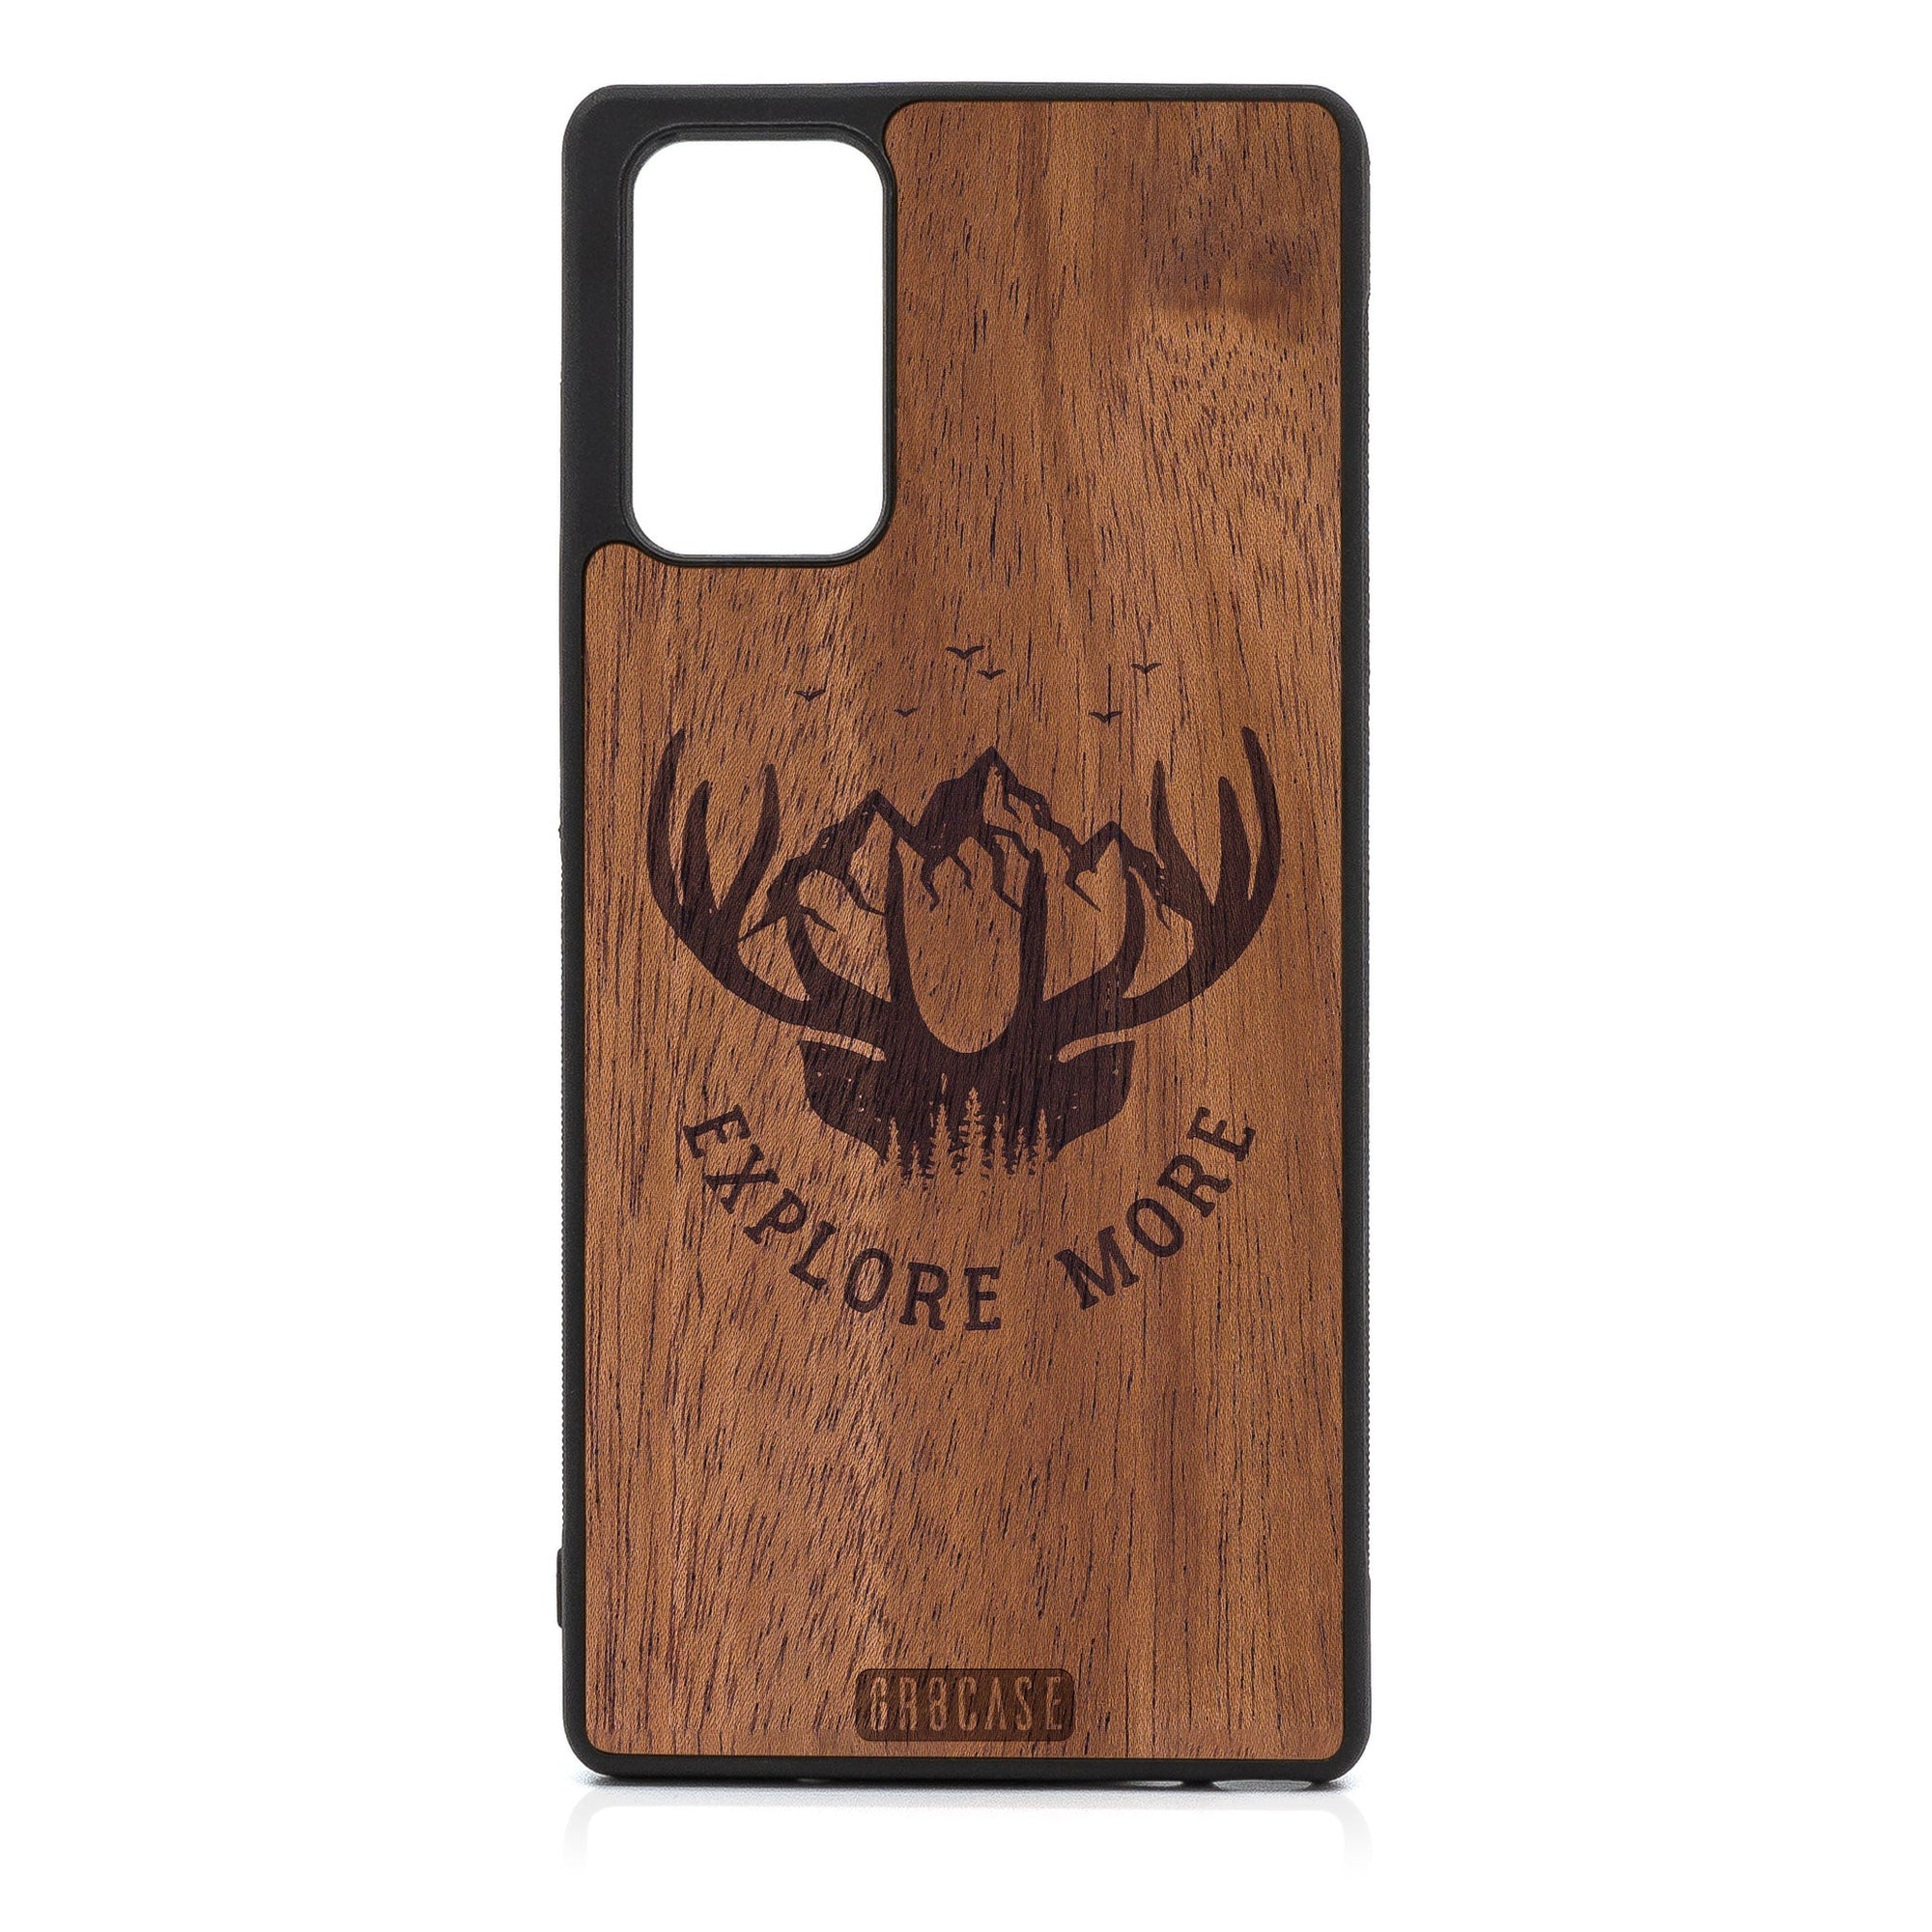 Explore More (Mountain & Antlers) Design Wood Case For Samsung Galaxy A52 5G